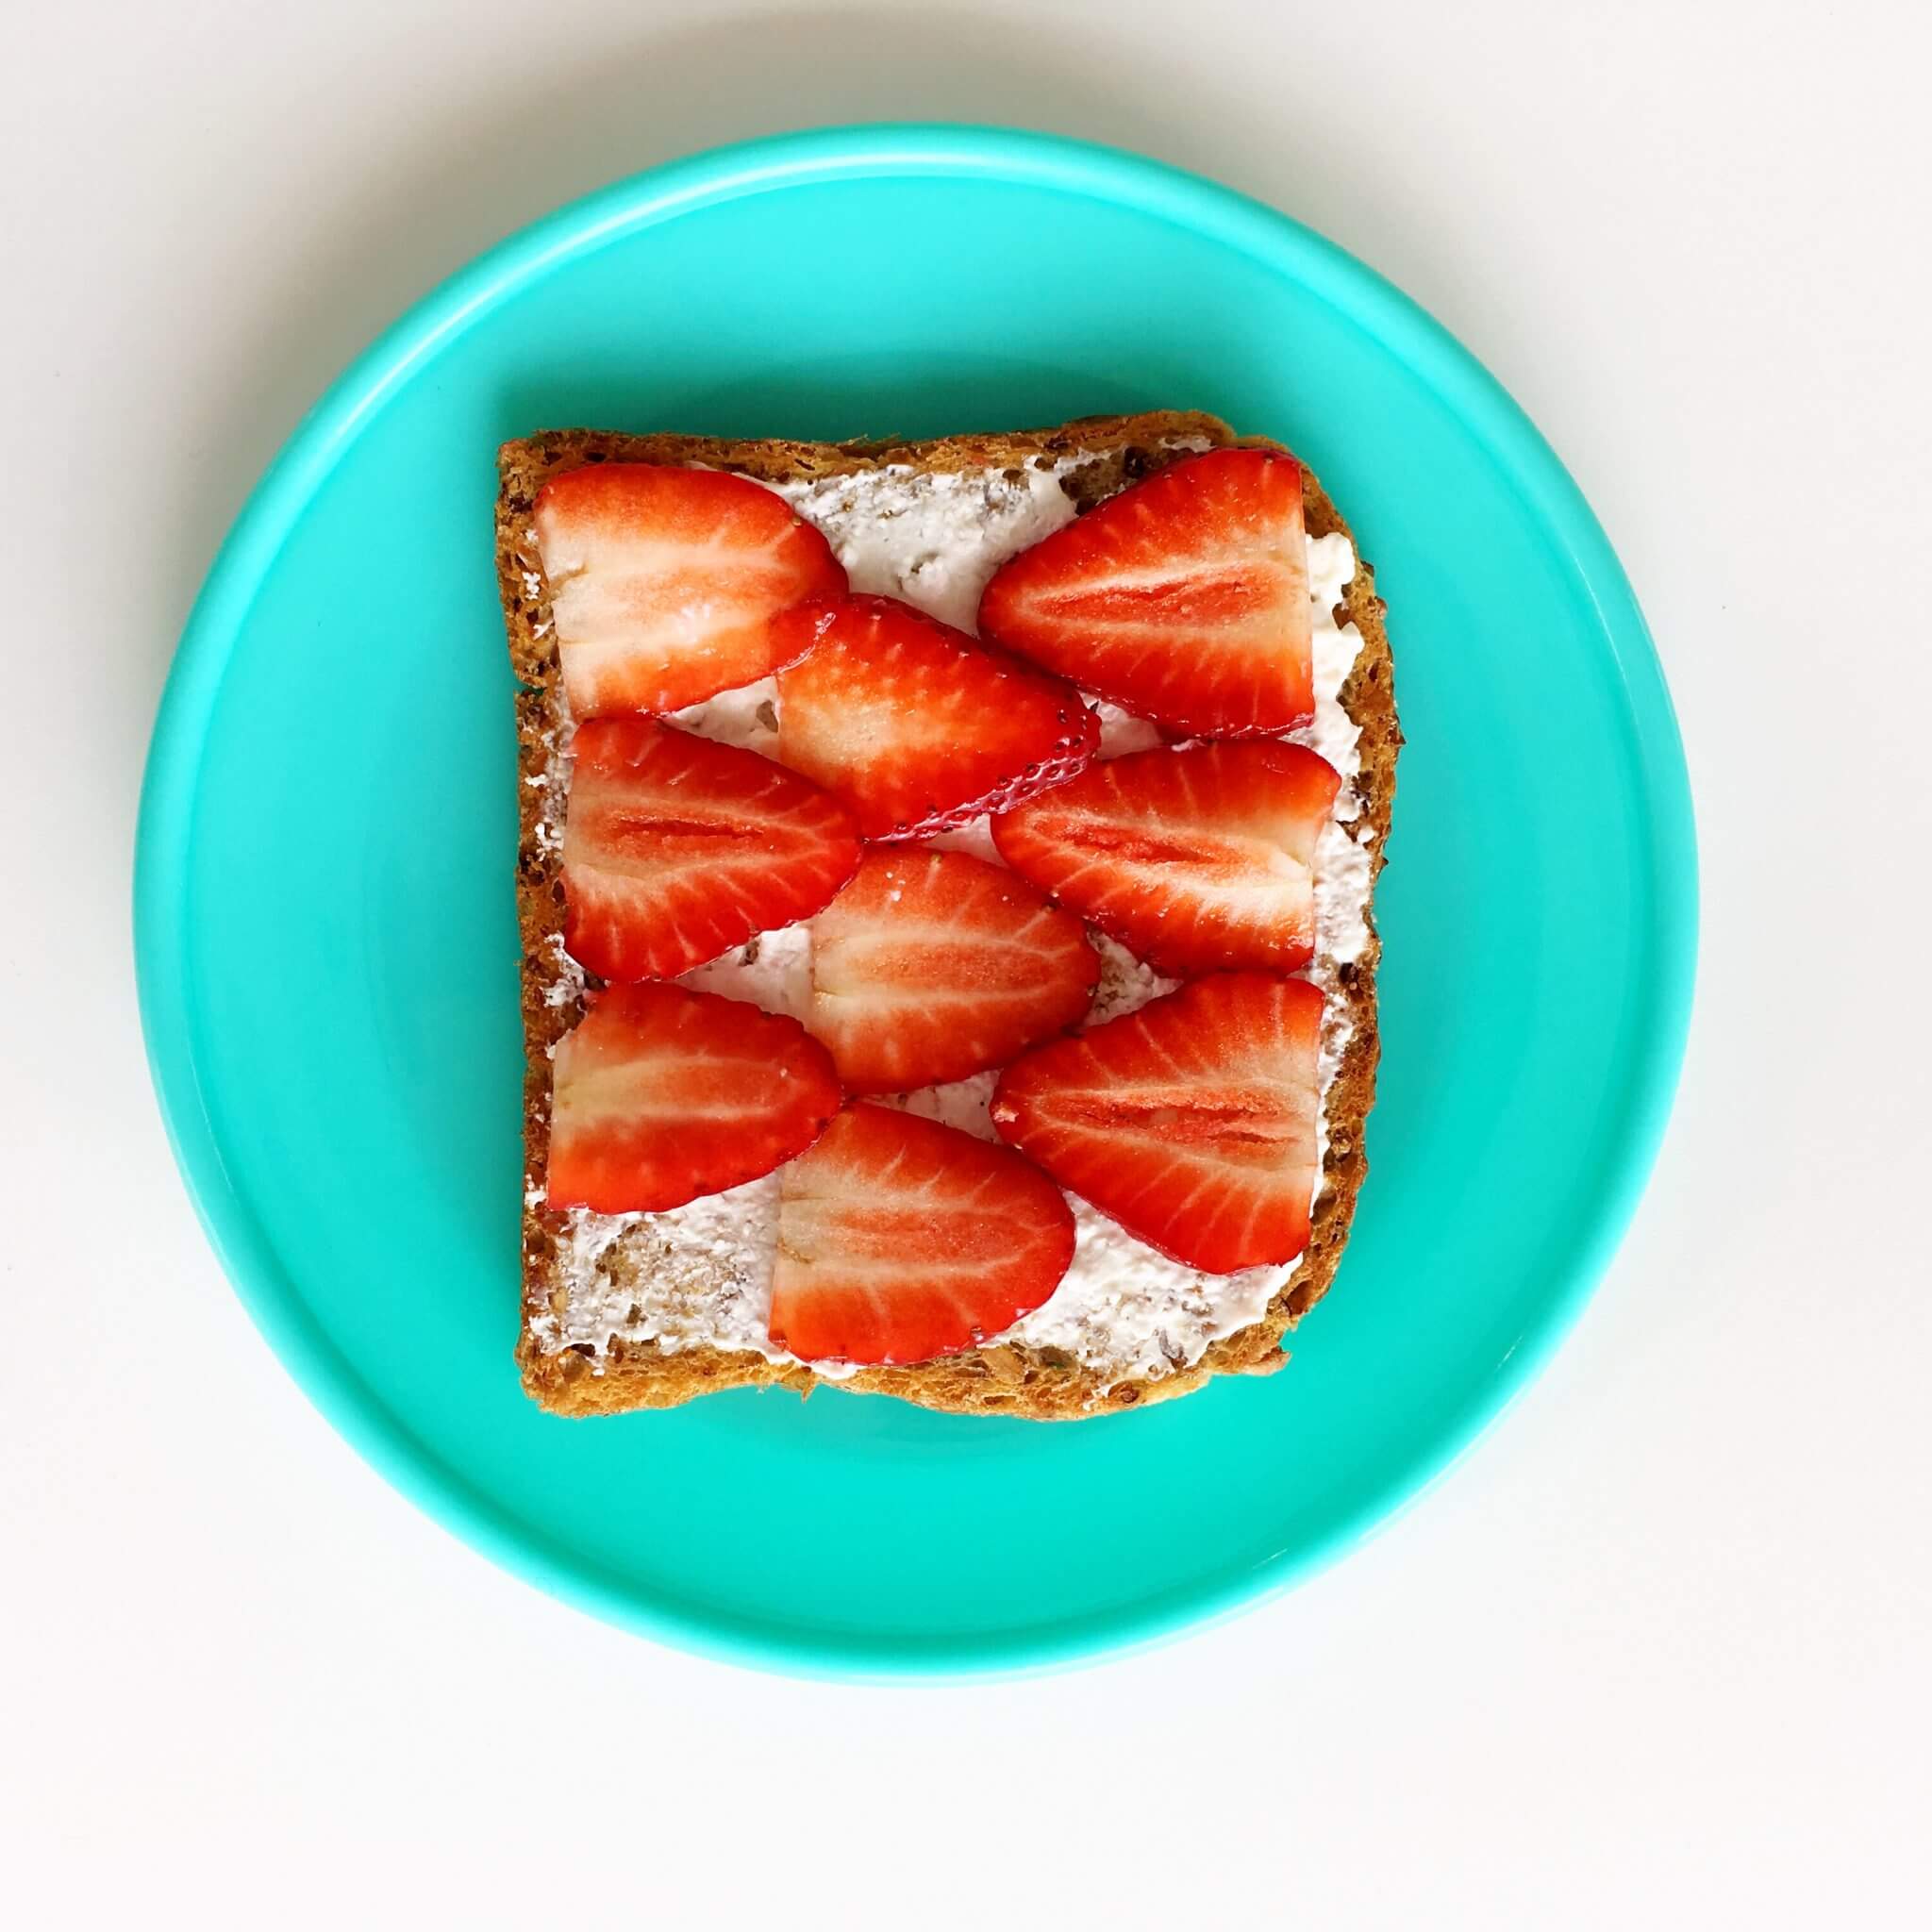 14 Snack Ideas your kids will love (and you’ll feel good about.)